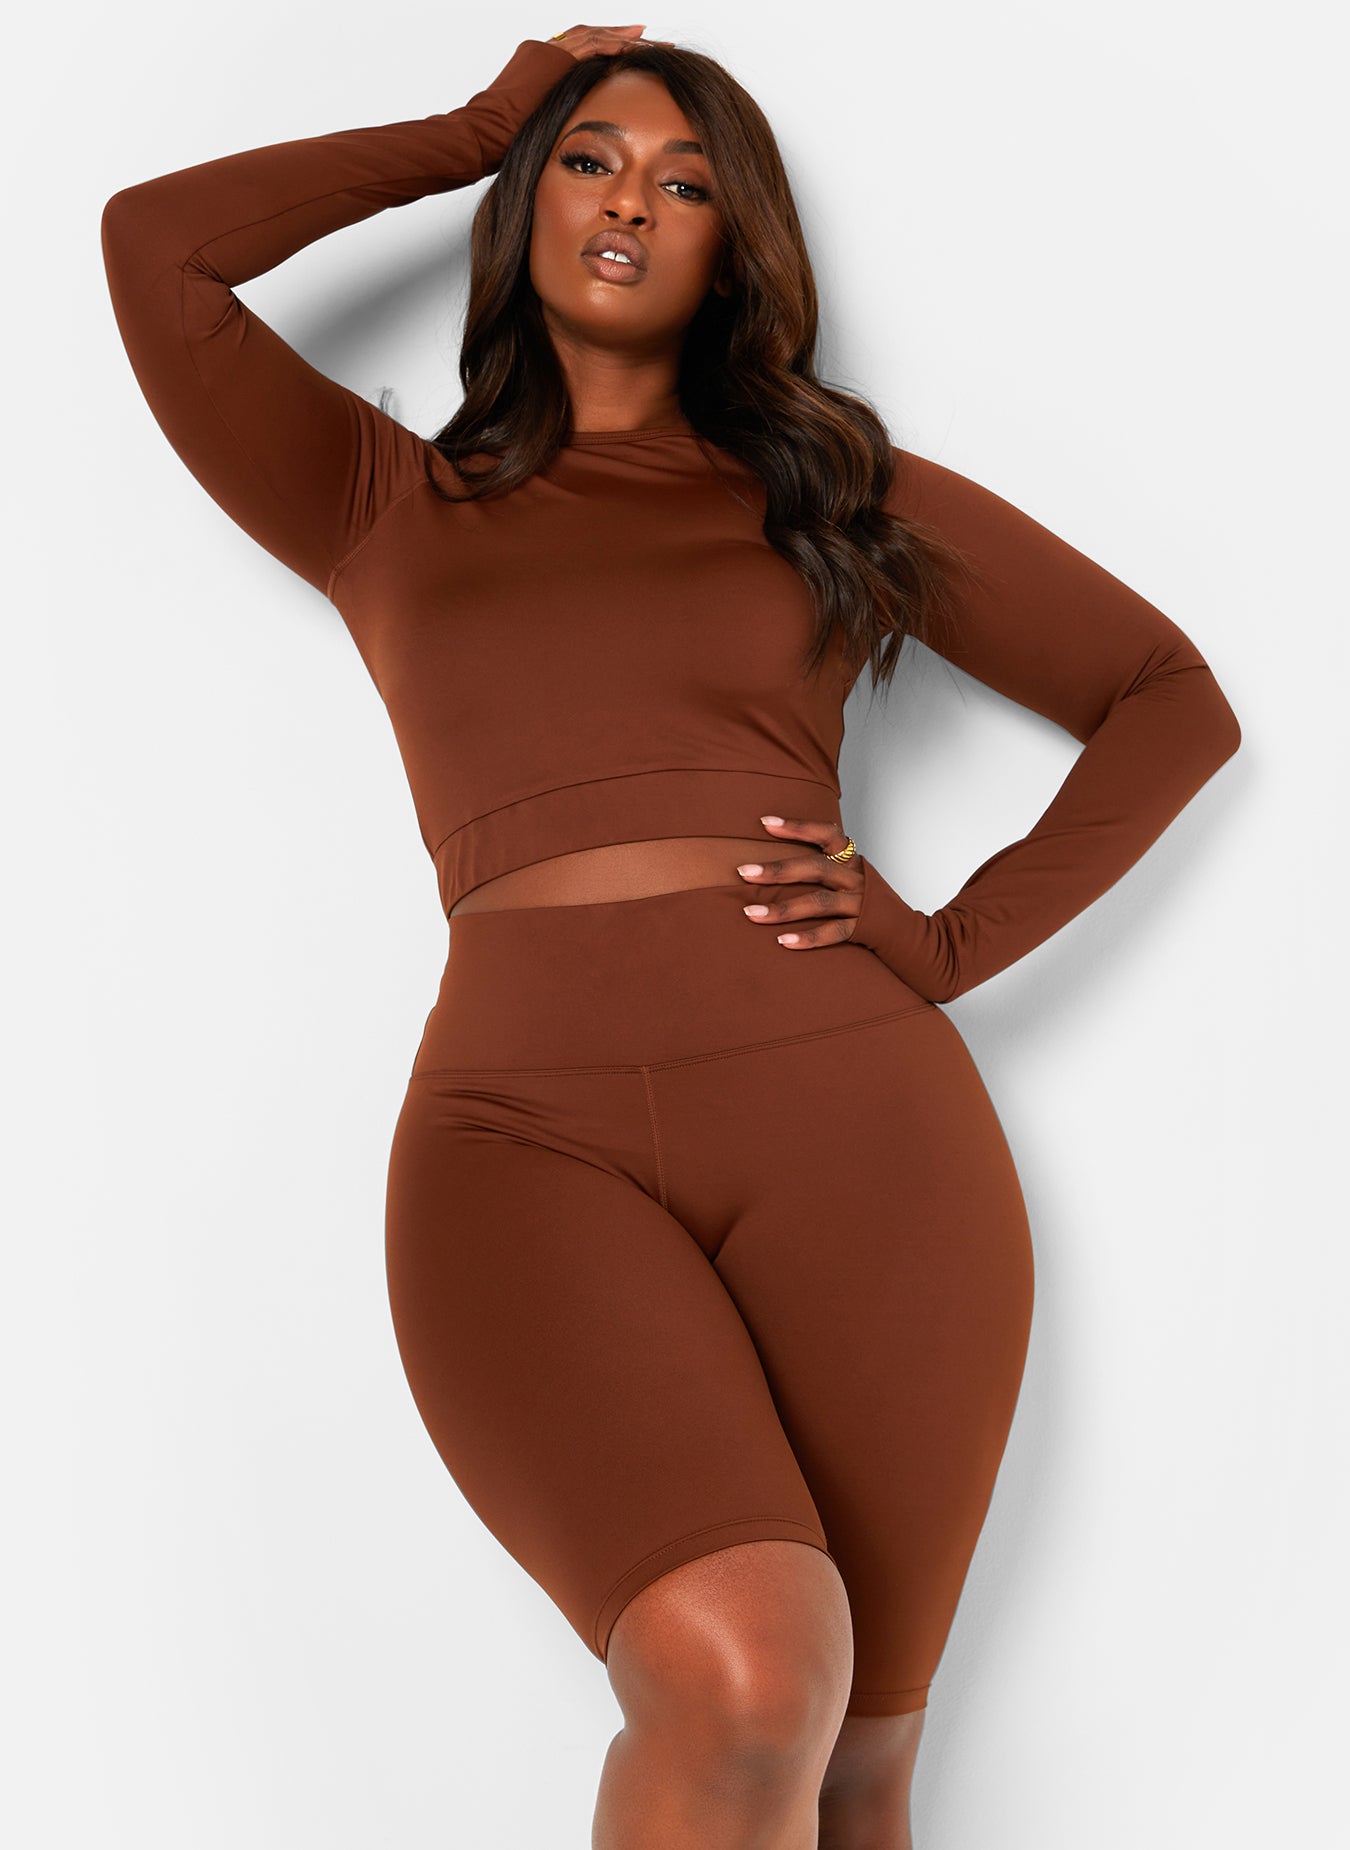 Brown Game Changer Long Sleeve Sports Crop Top Plus Sizes